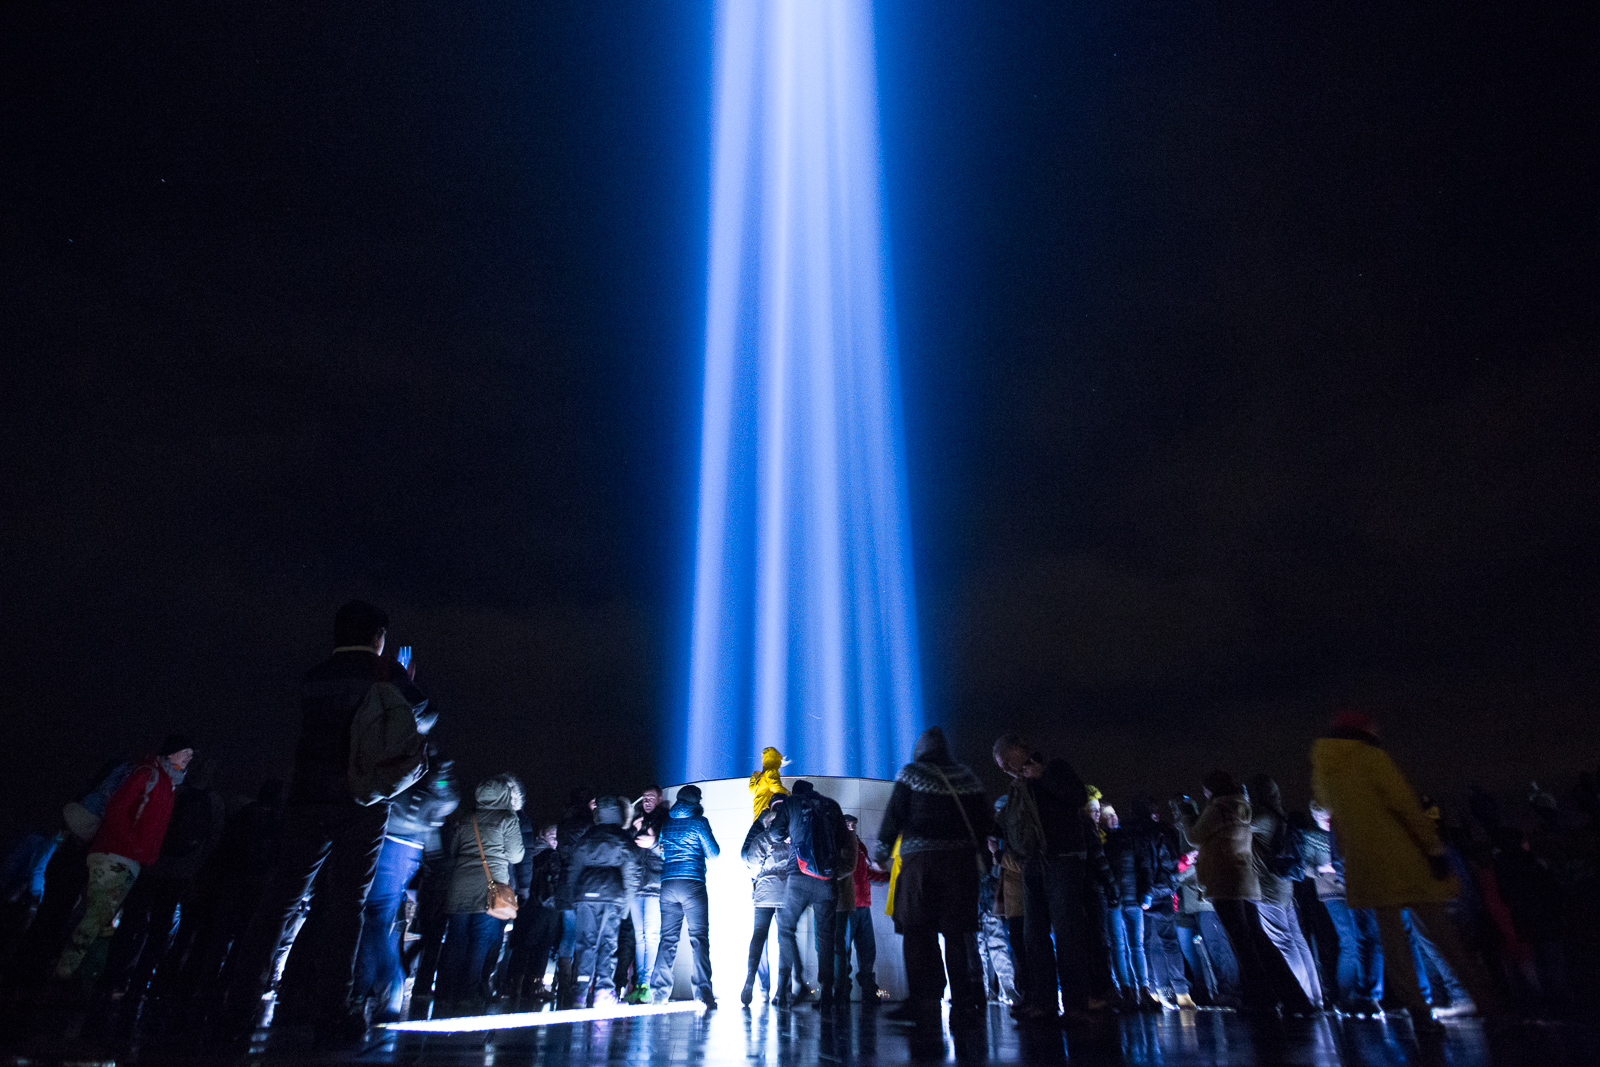 From Iceland – Imagine Peace Tower lights up for Lennon’s birthday